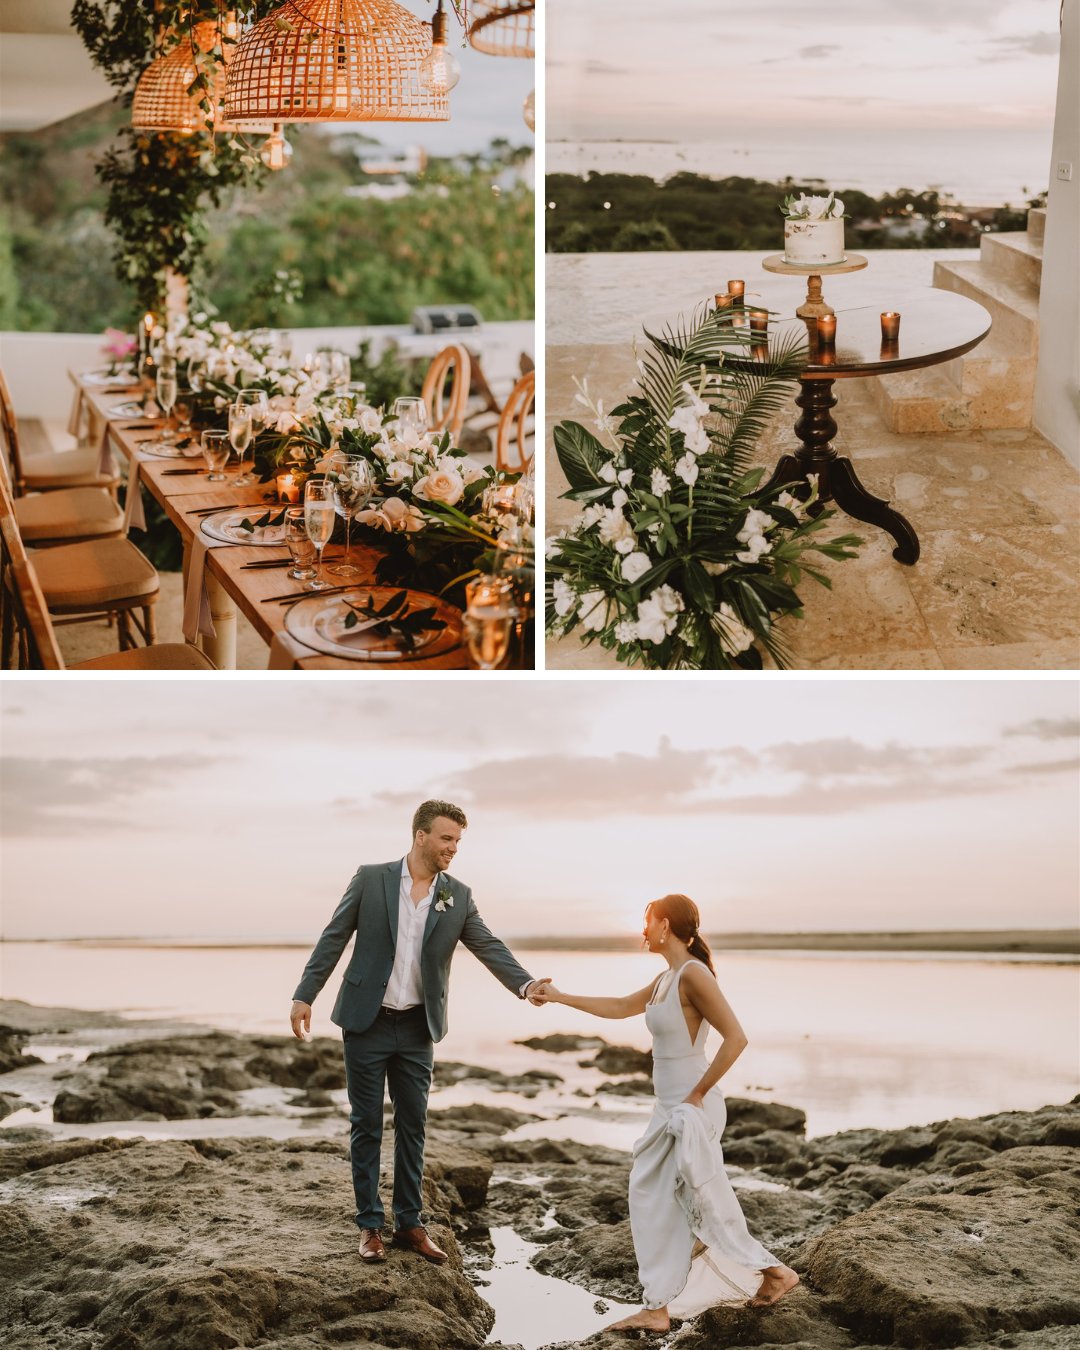 table set under hanging wicker lamps and decorative greenery; white cake sits on a wooden table overlooking the ocean at sunset; Chris helps Karina cross over puddle on rocks by the sea